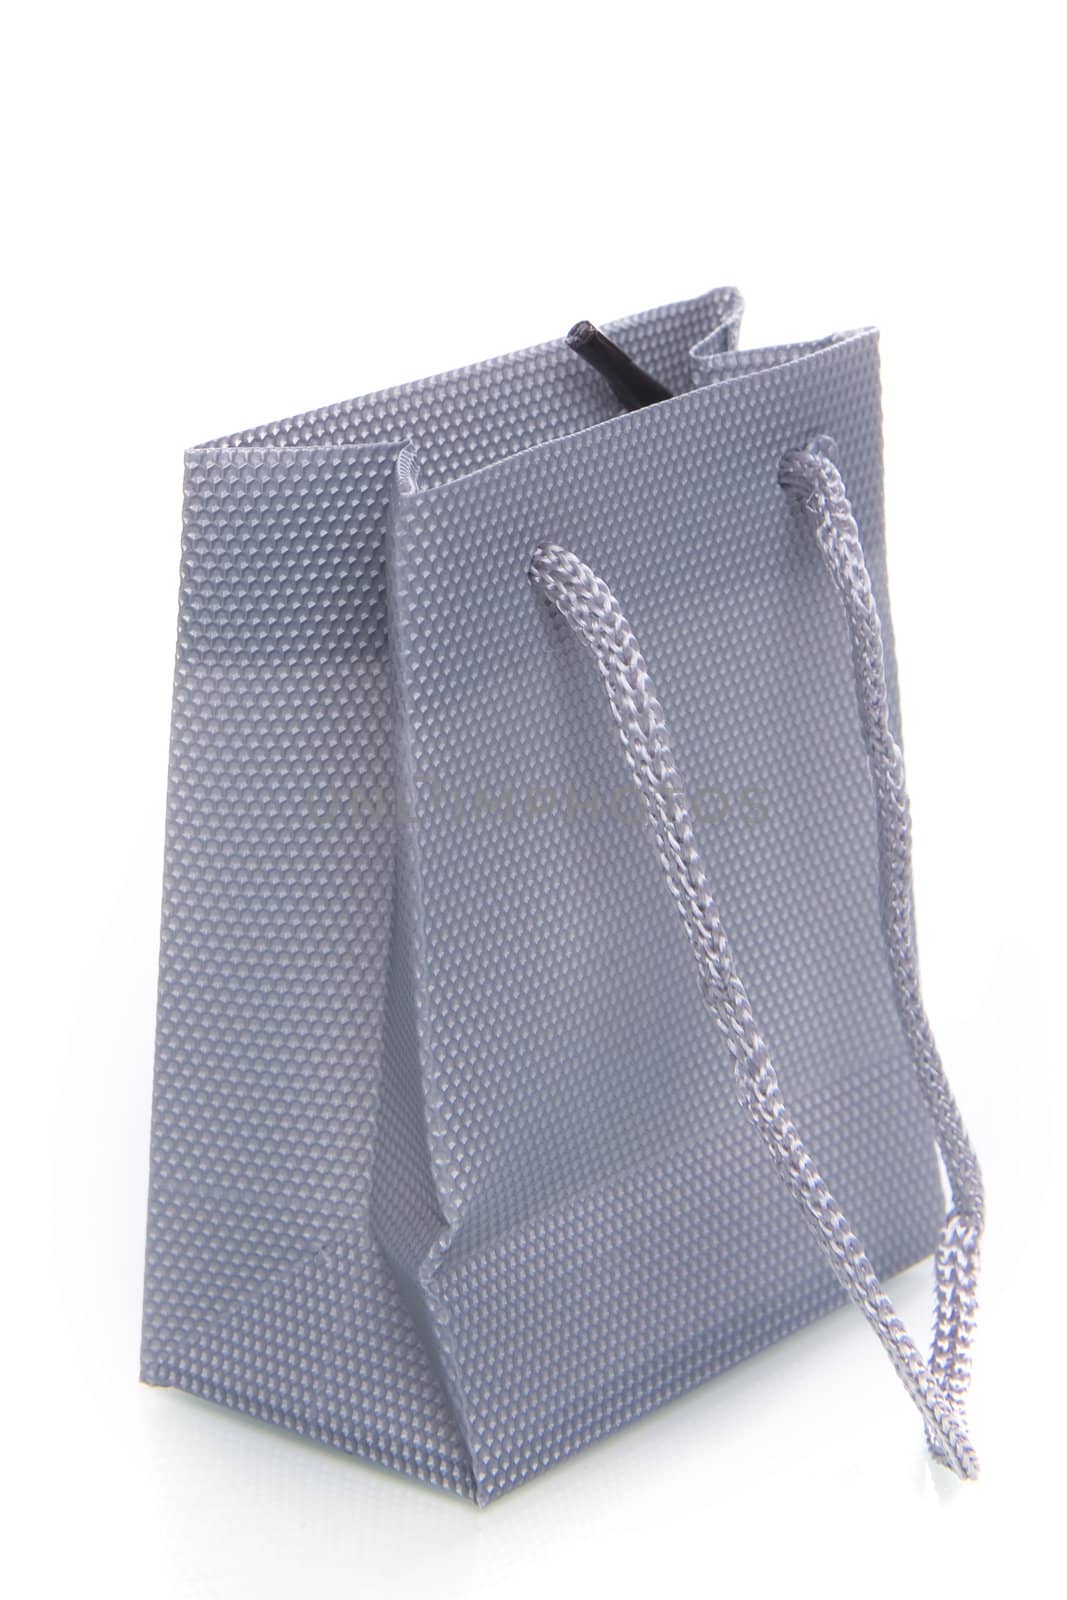 a gray bag on a white background